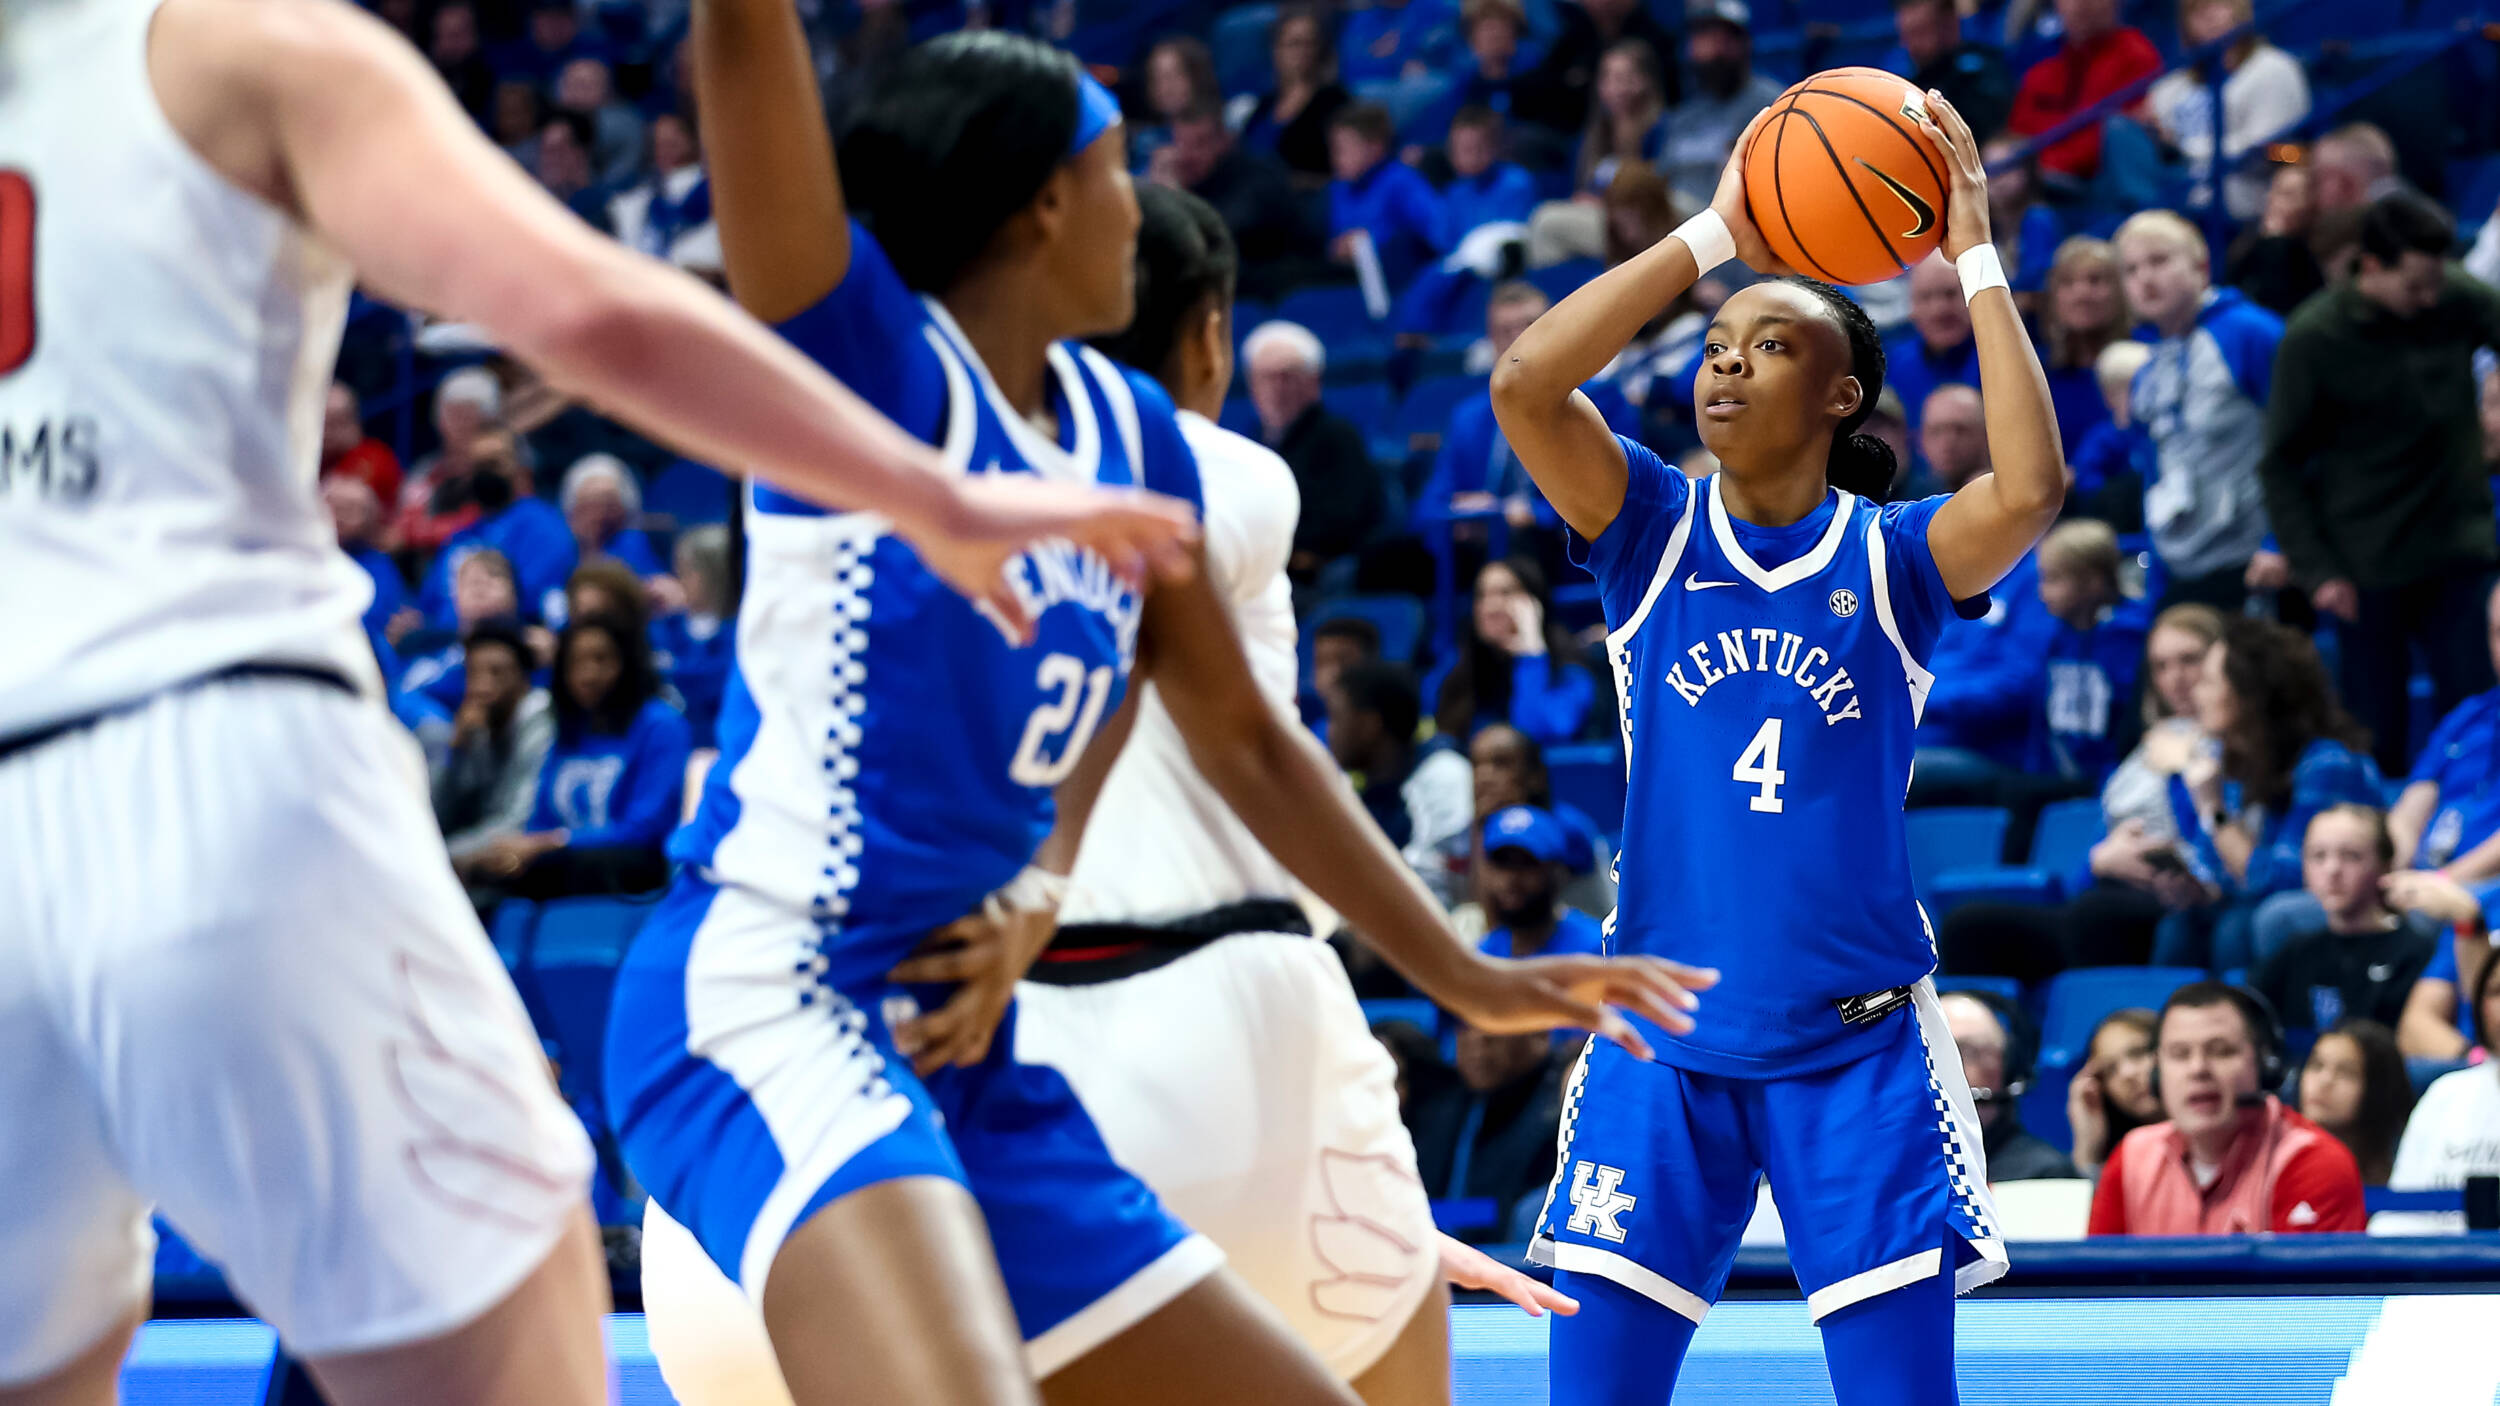 Kentucky Plays Host to Murray State, Florida Gulf Coast in Weekend Doubleheader